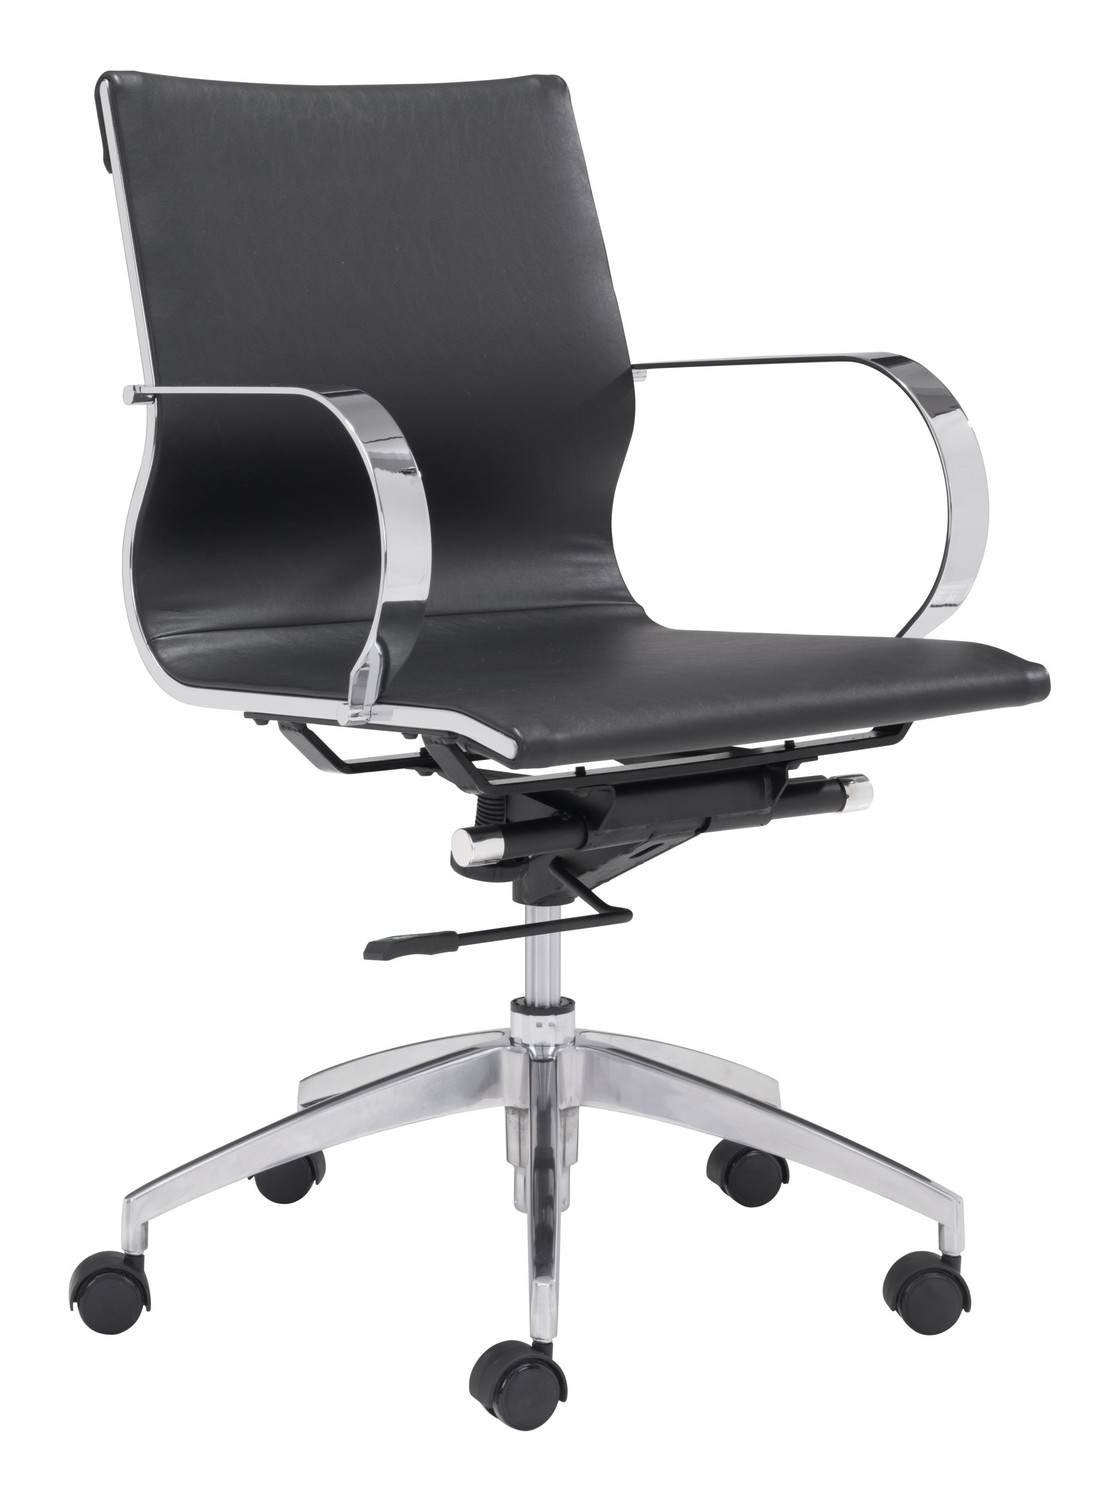 Black Ergonomic Conference Room Low Back Rolling Office Chair